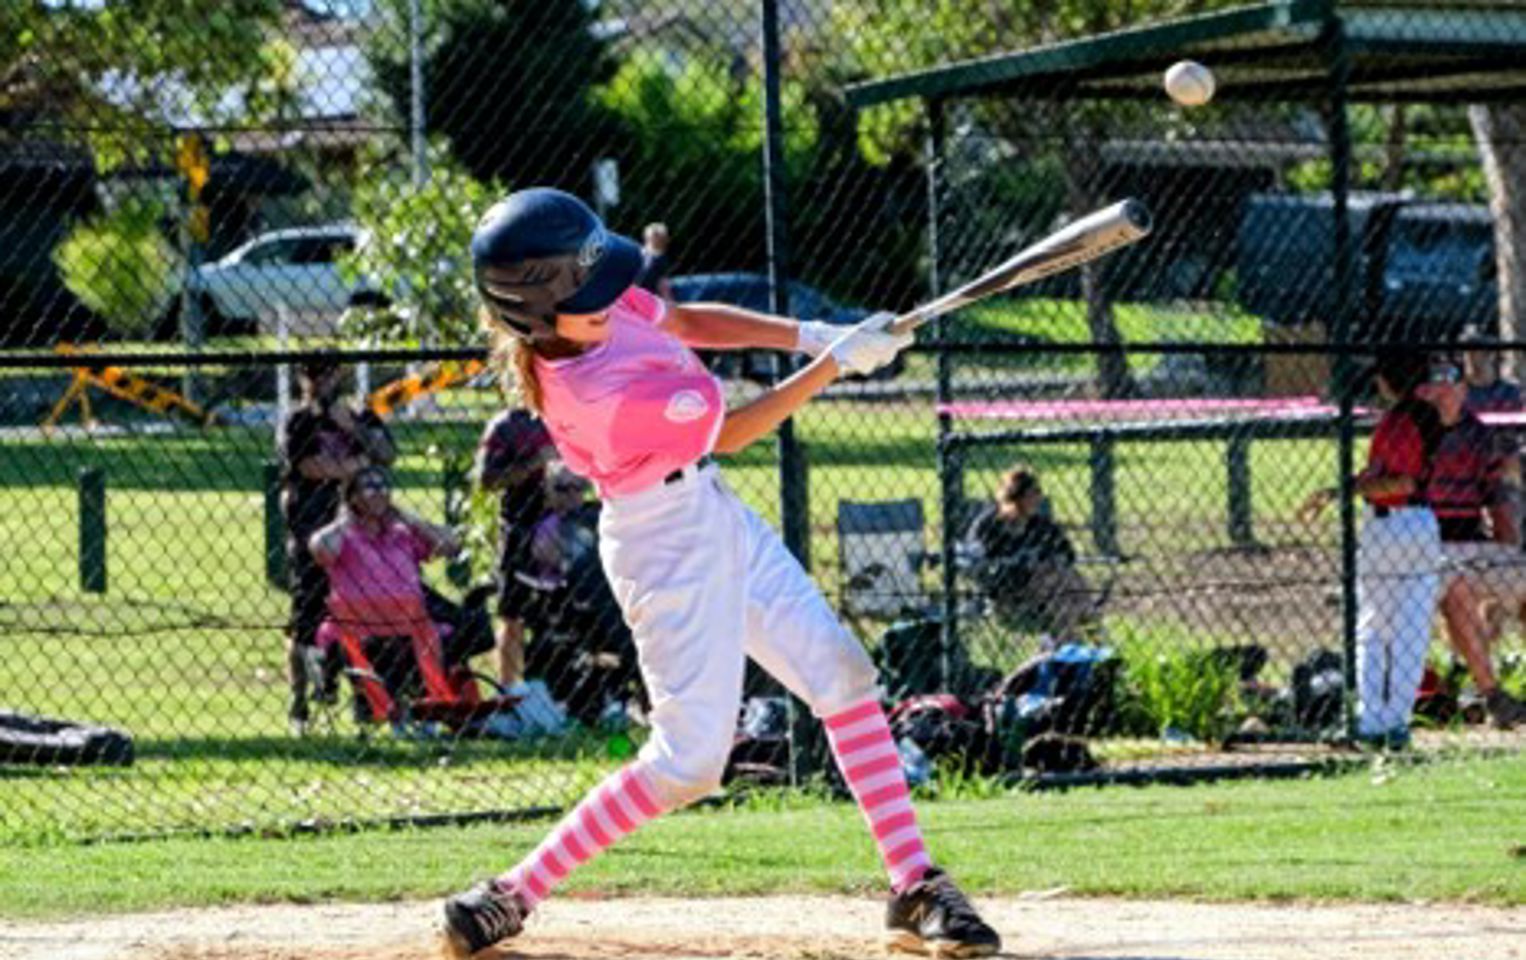 Baseball player in pink